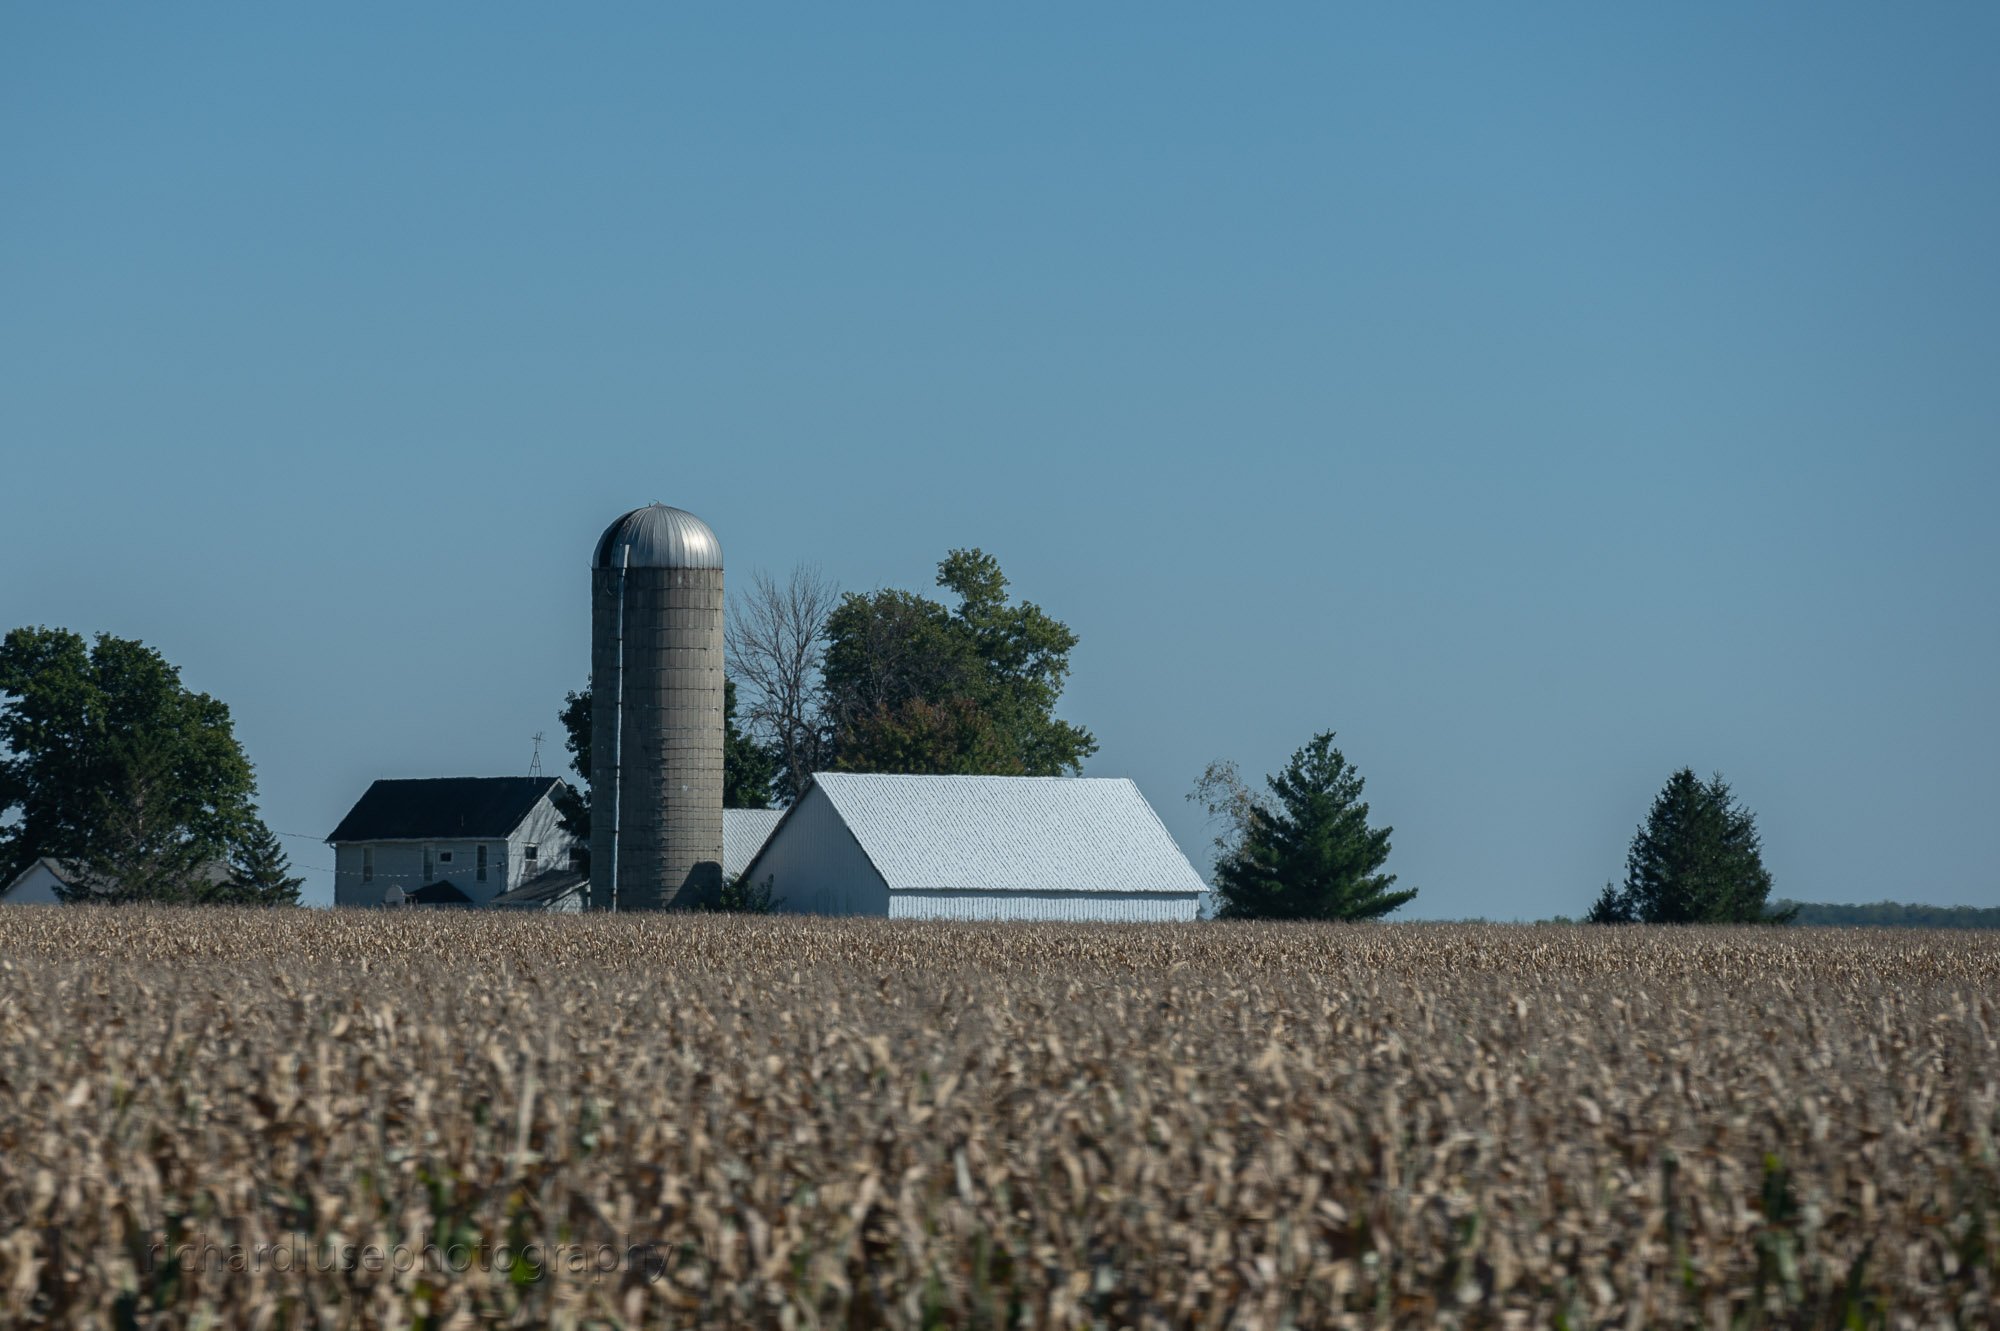 Ohio & Illinois have a huge number of corn farms